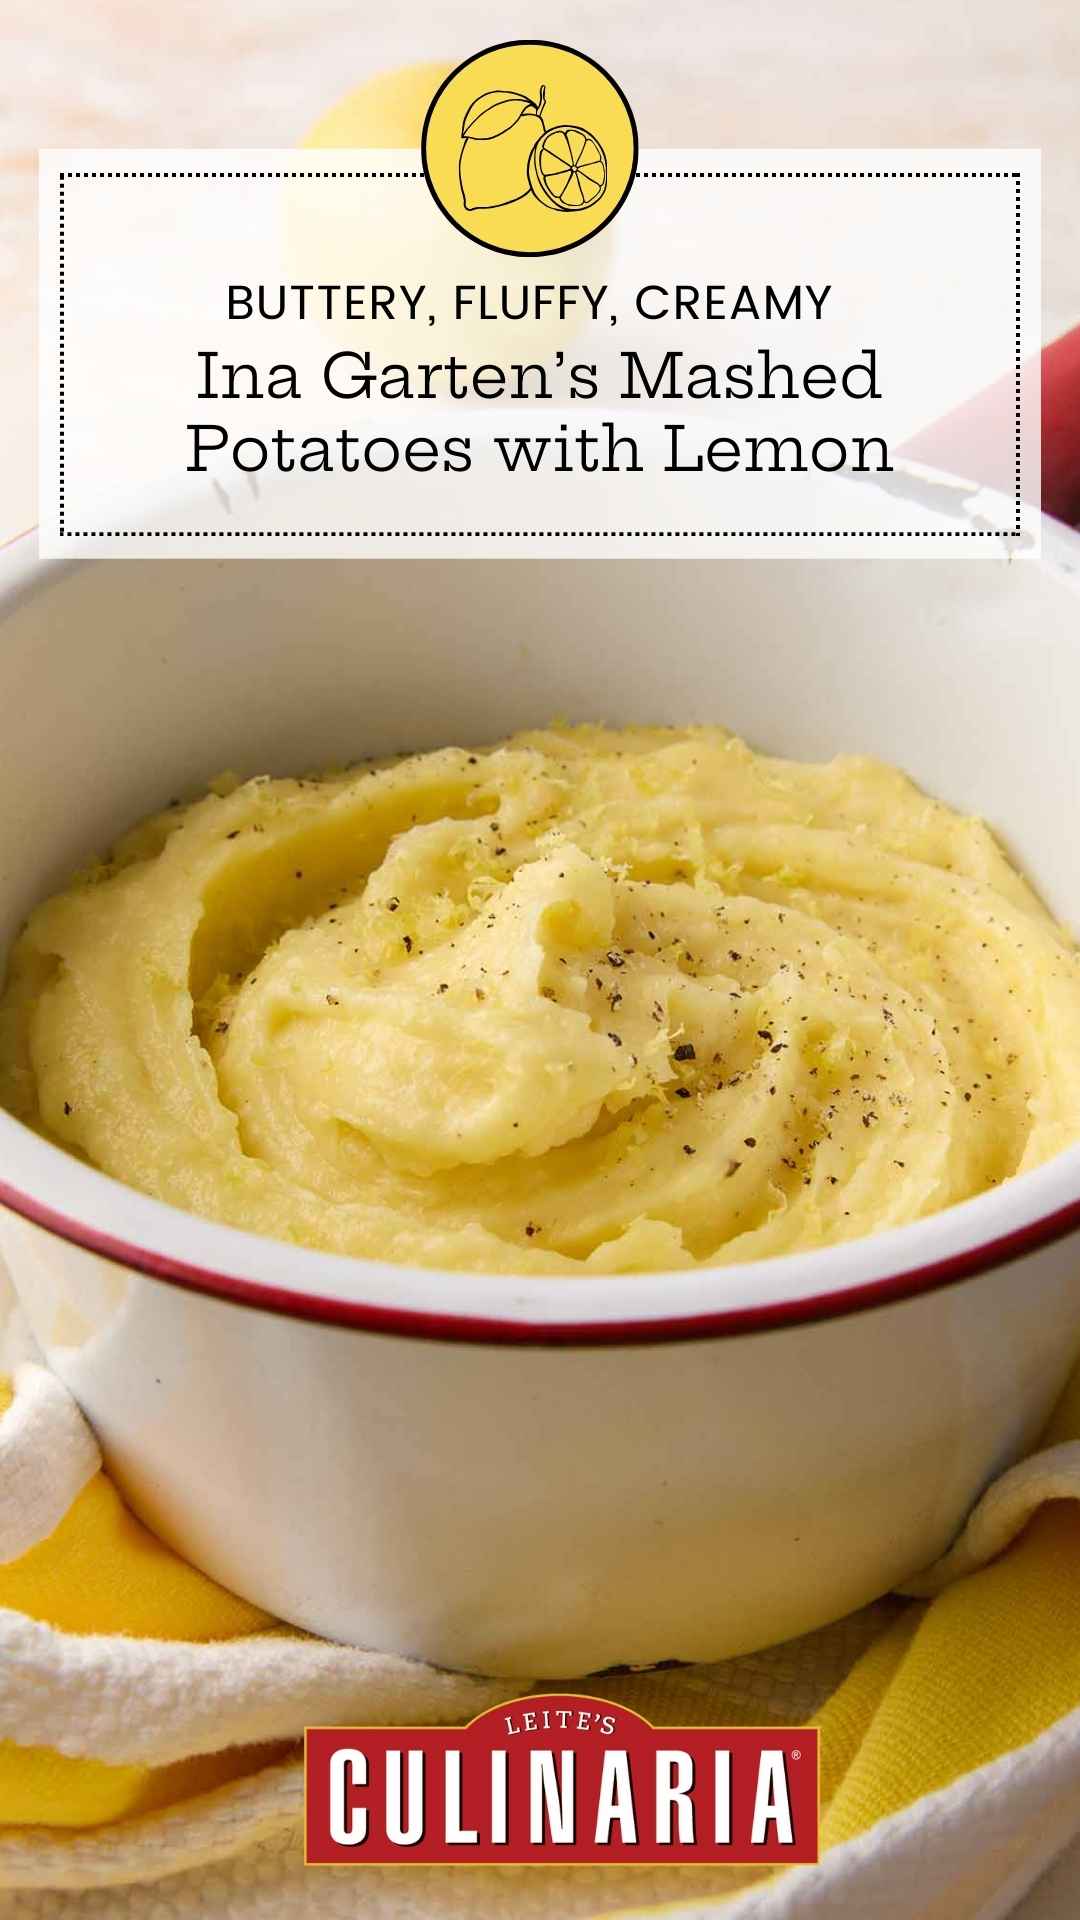 An enamel bowl filled with mashed potatoes, topped with black pepper and lemon zest.